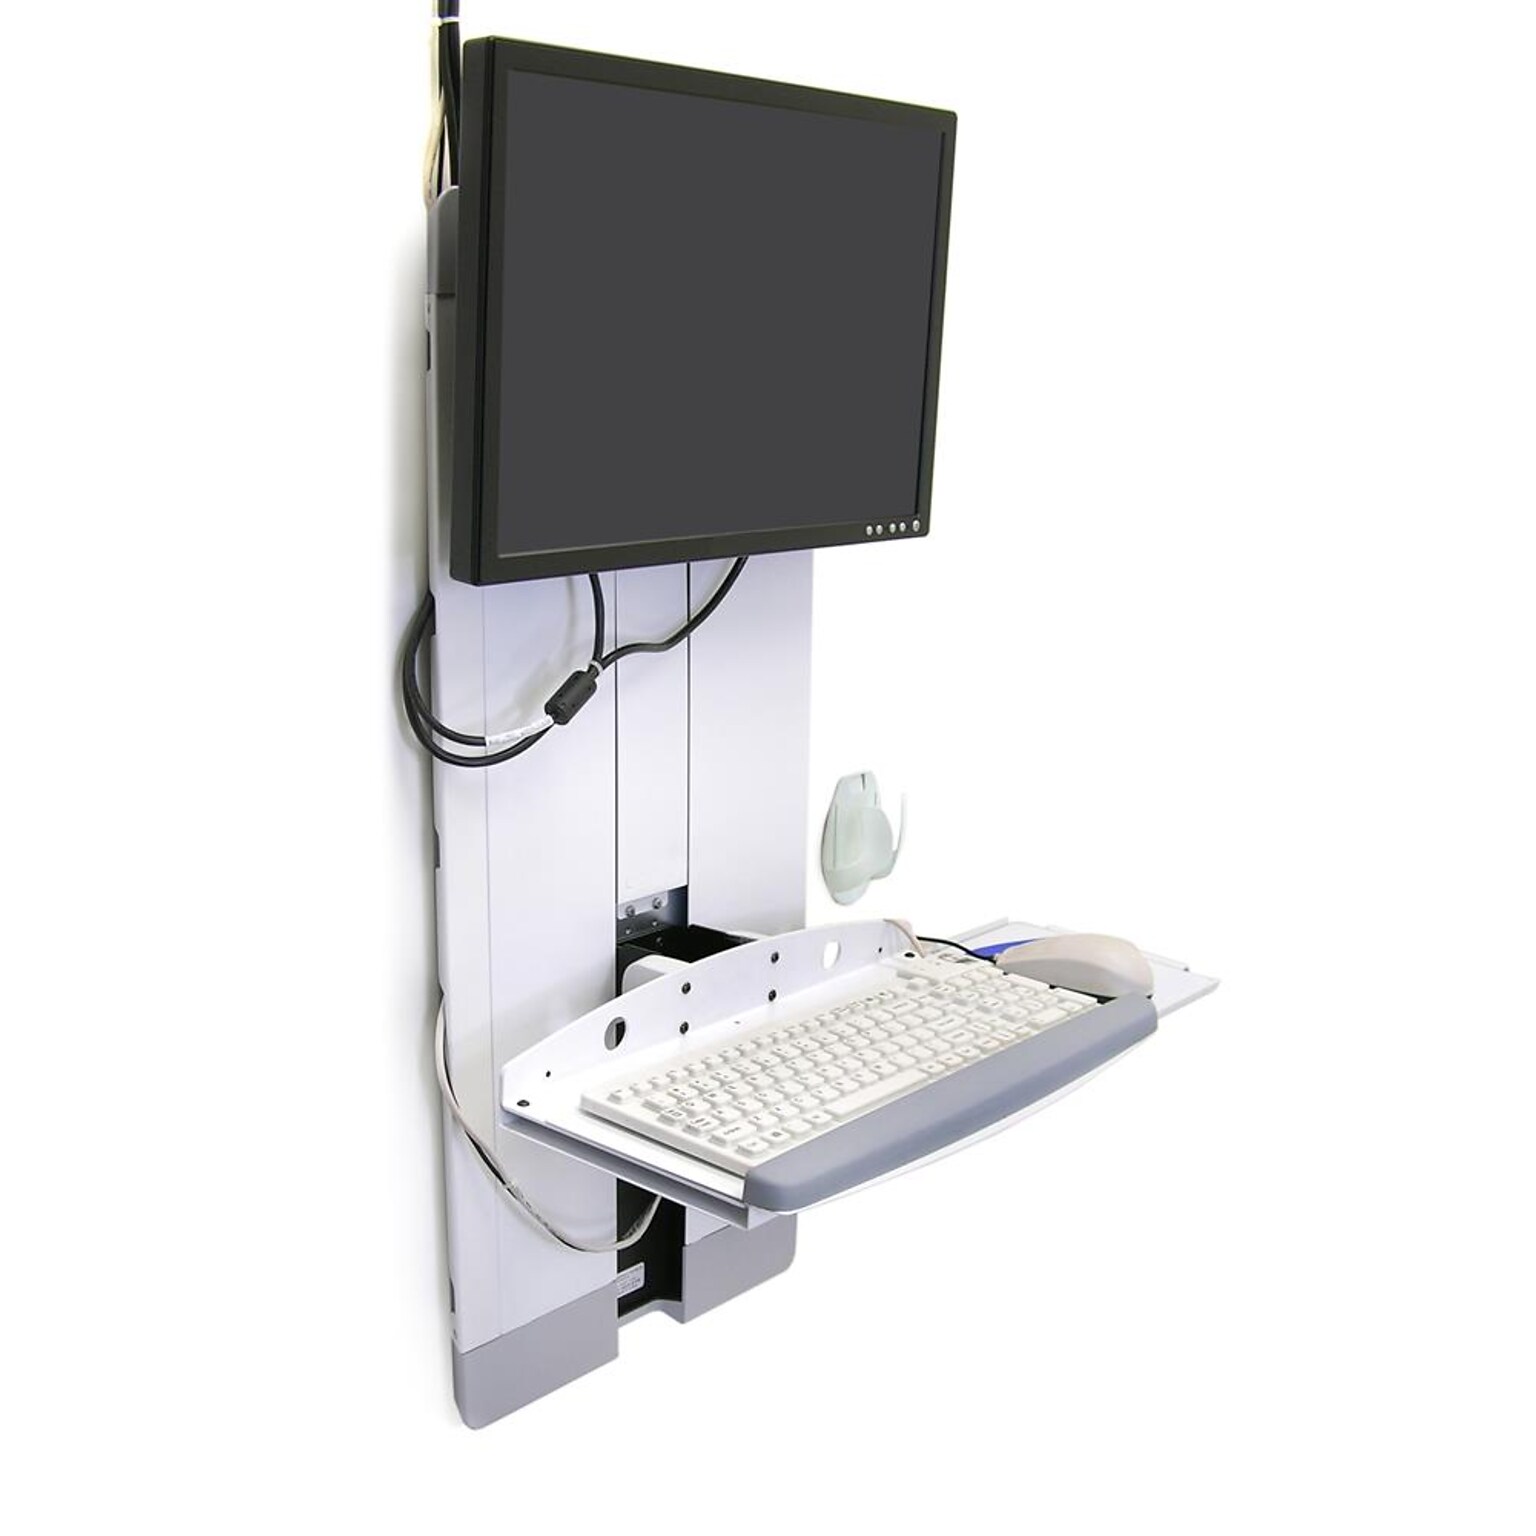 Ergotron StyleView Vertical Lift Adjustable High Traffic Area, 24 Screen Support, White (60-593-216)